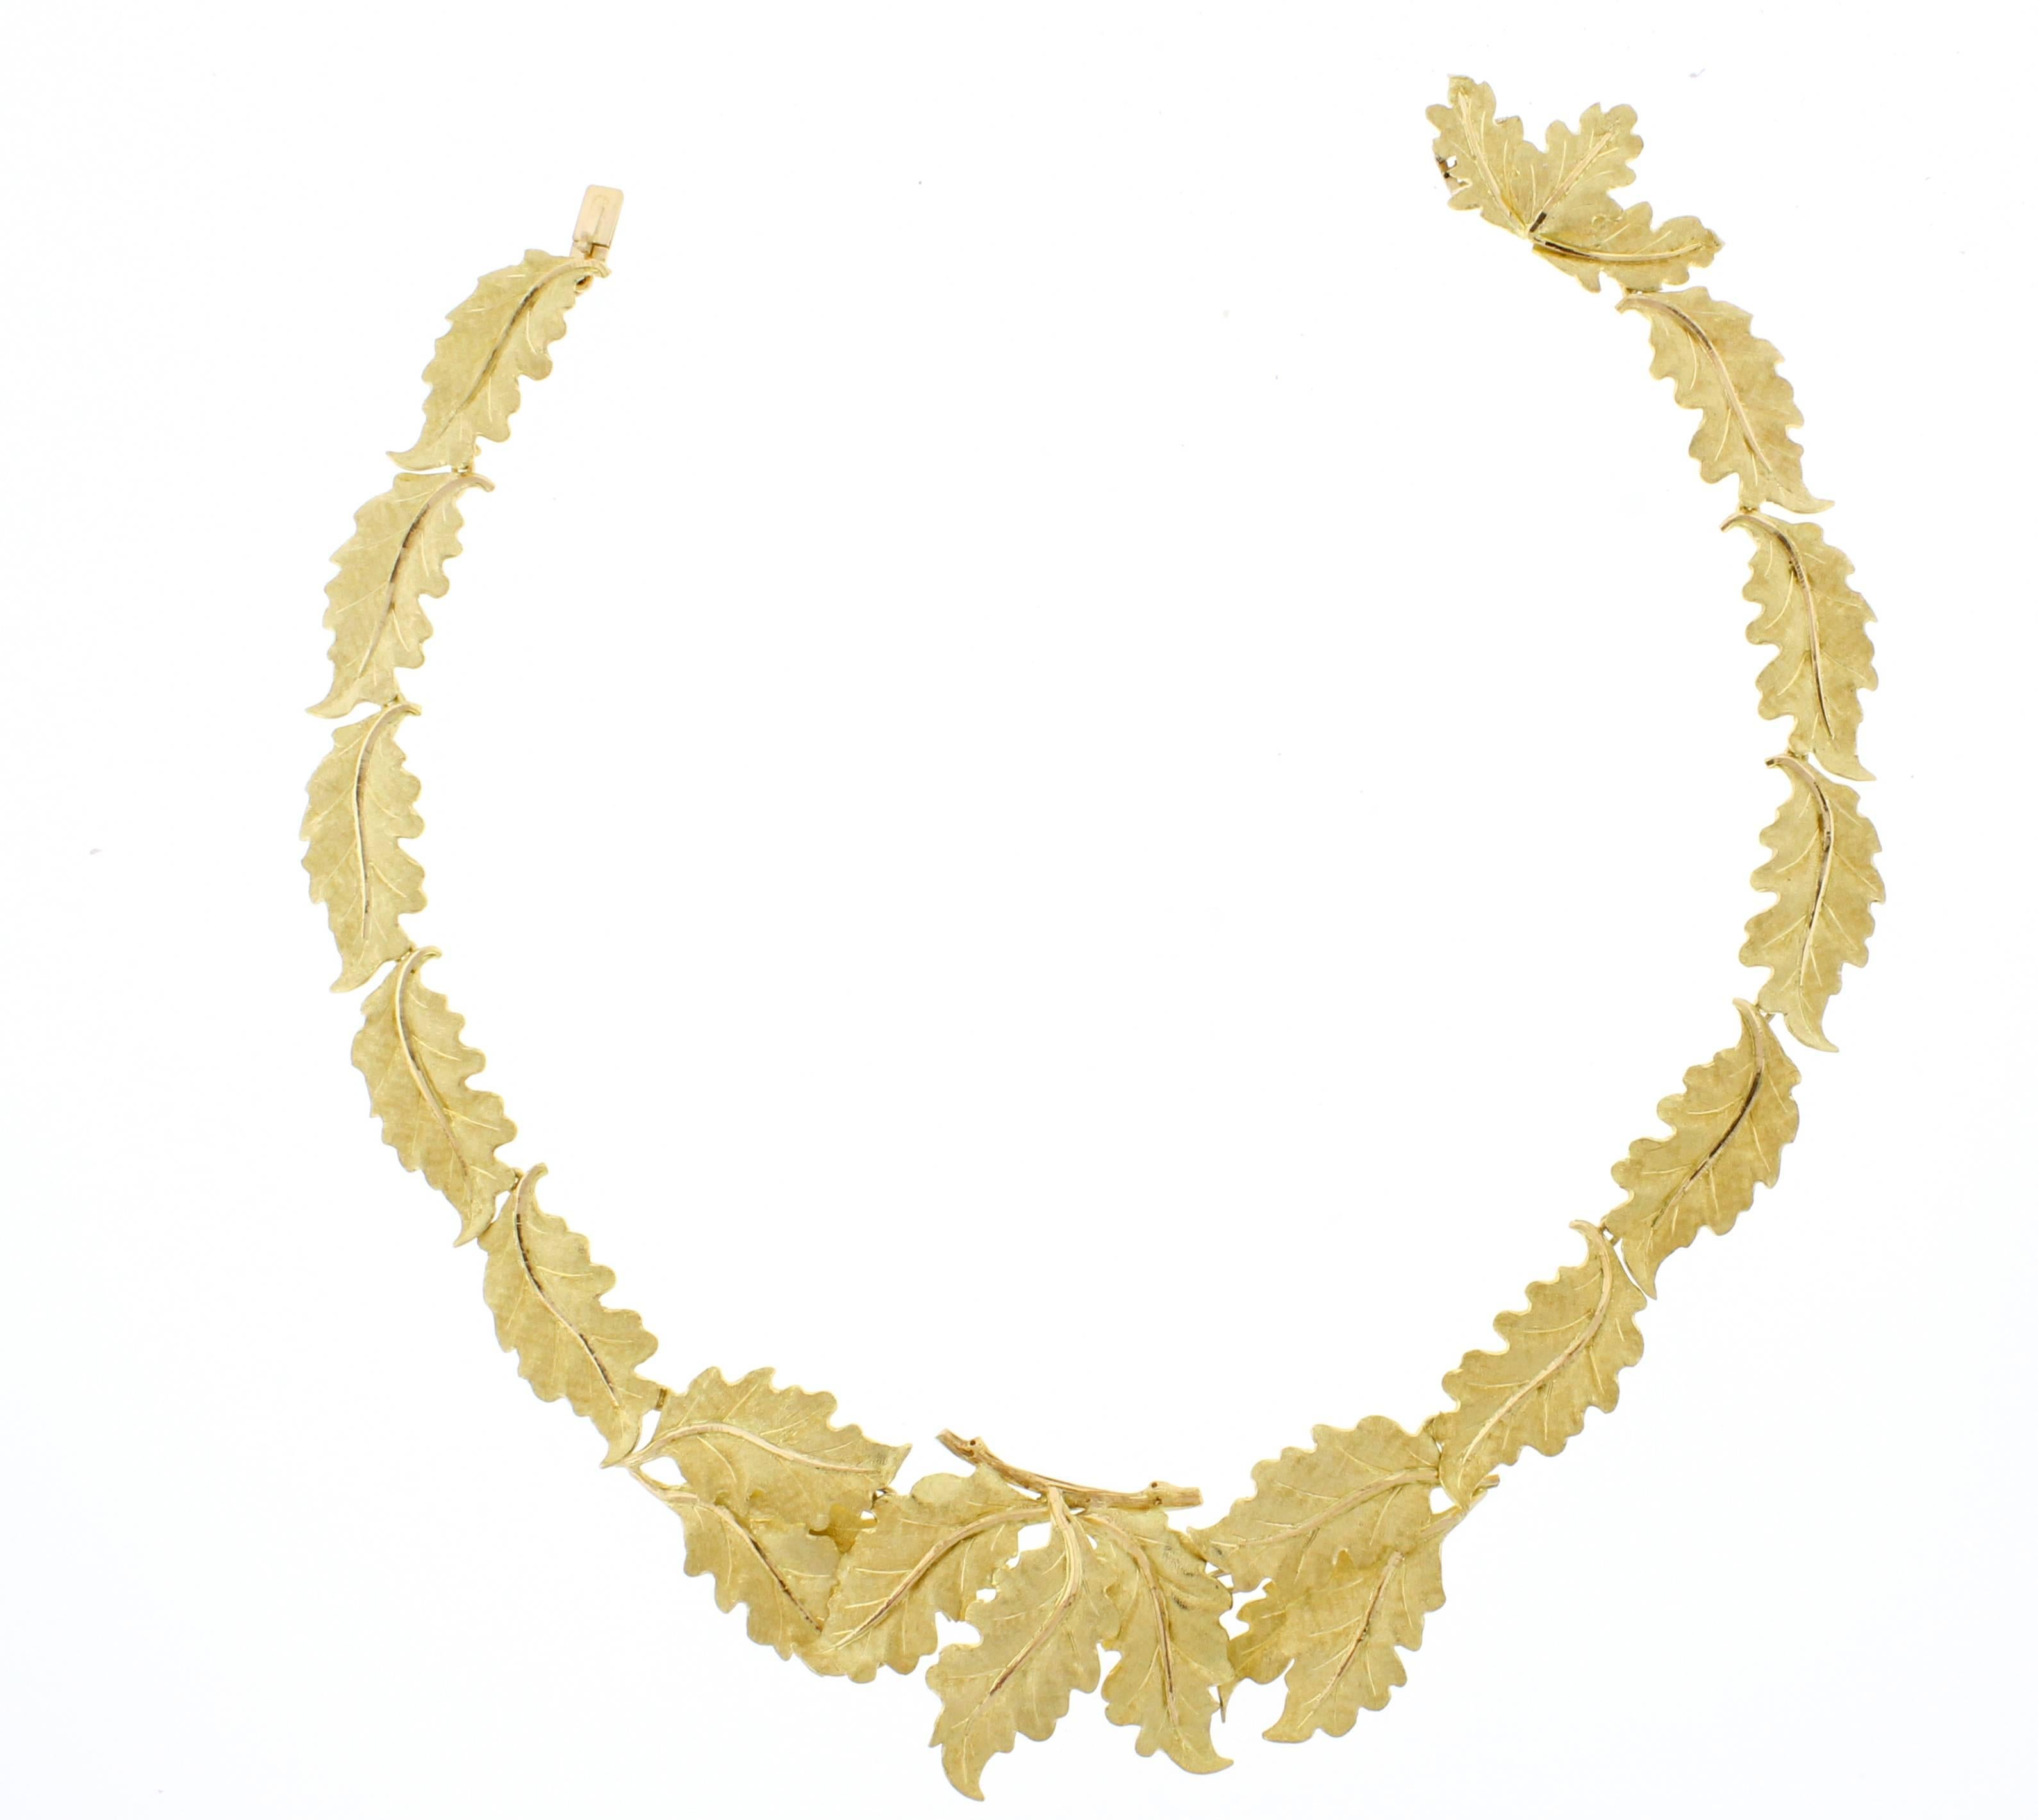 18 karat yellow and pink gold oak leaf necklace, signed M.Buccellati. The necklace is measures 15 inches long and  5/8 of an inch wide . The hand engraved leafs are accented by a pink gold petiole and a center pink gold axil.